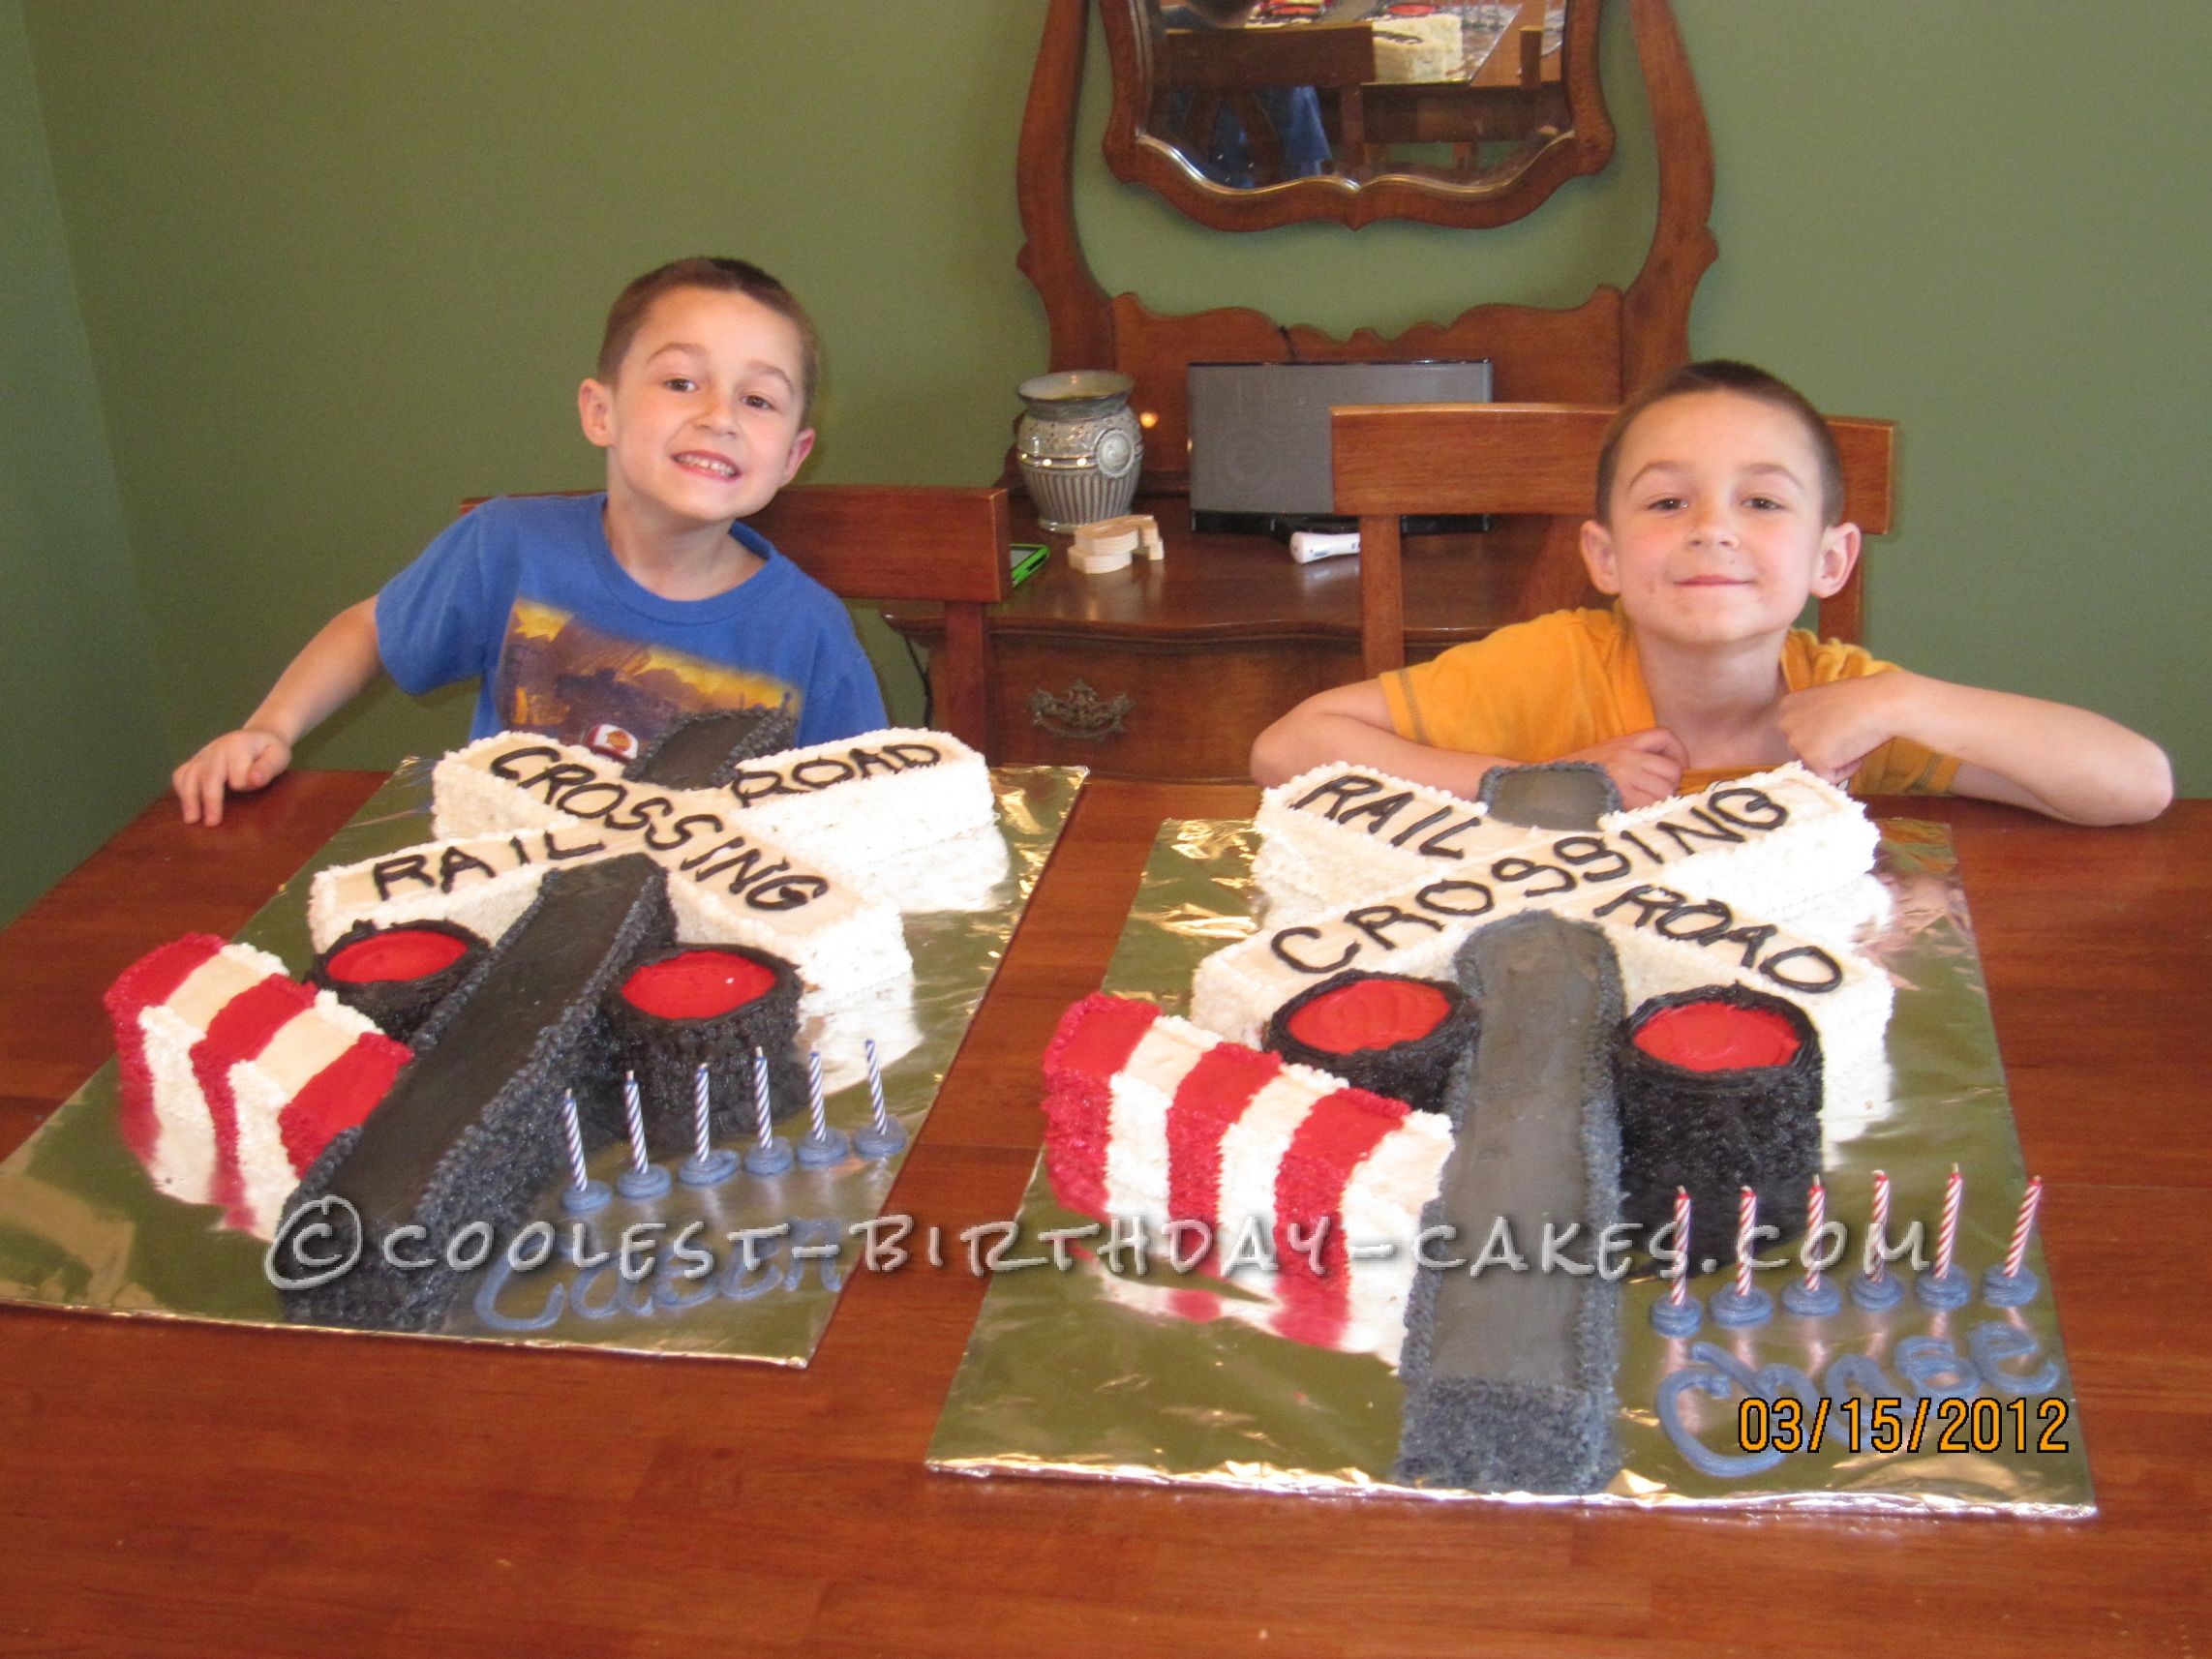 Coolest Railroad Crossing Gate Birthday Cakes for Twins